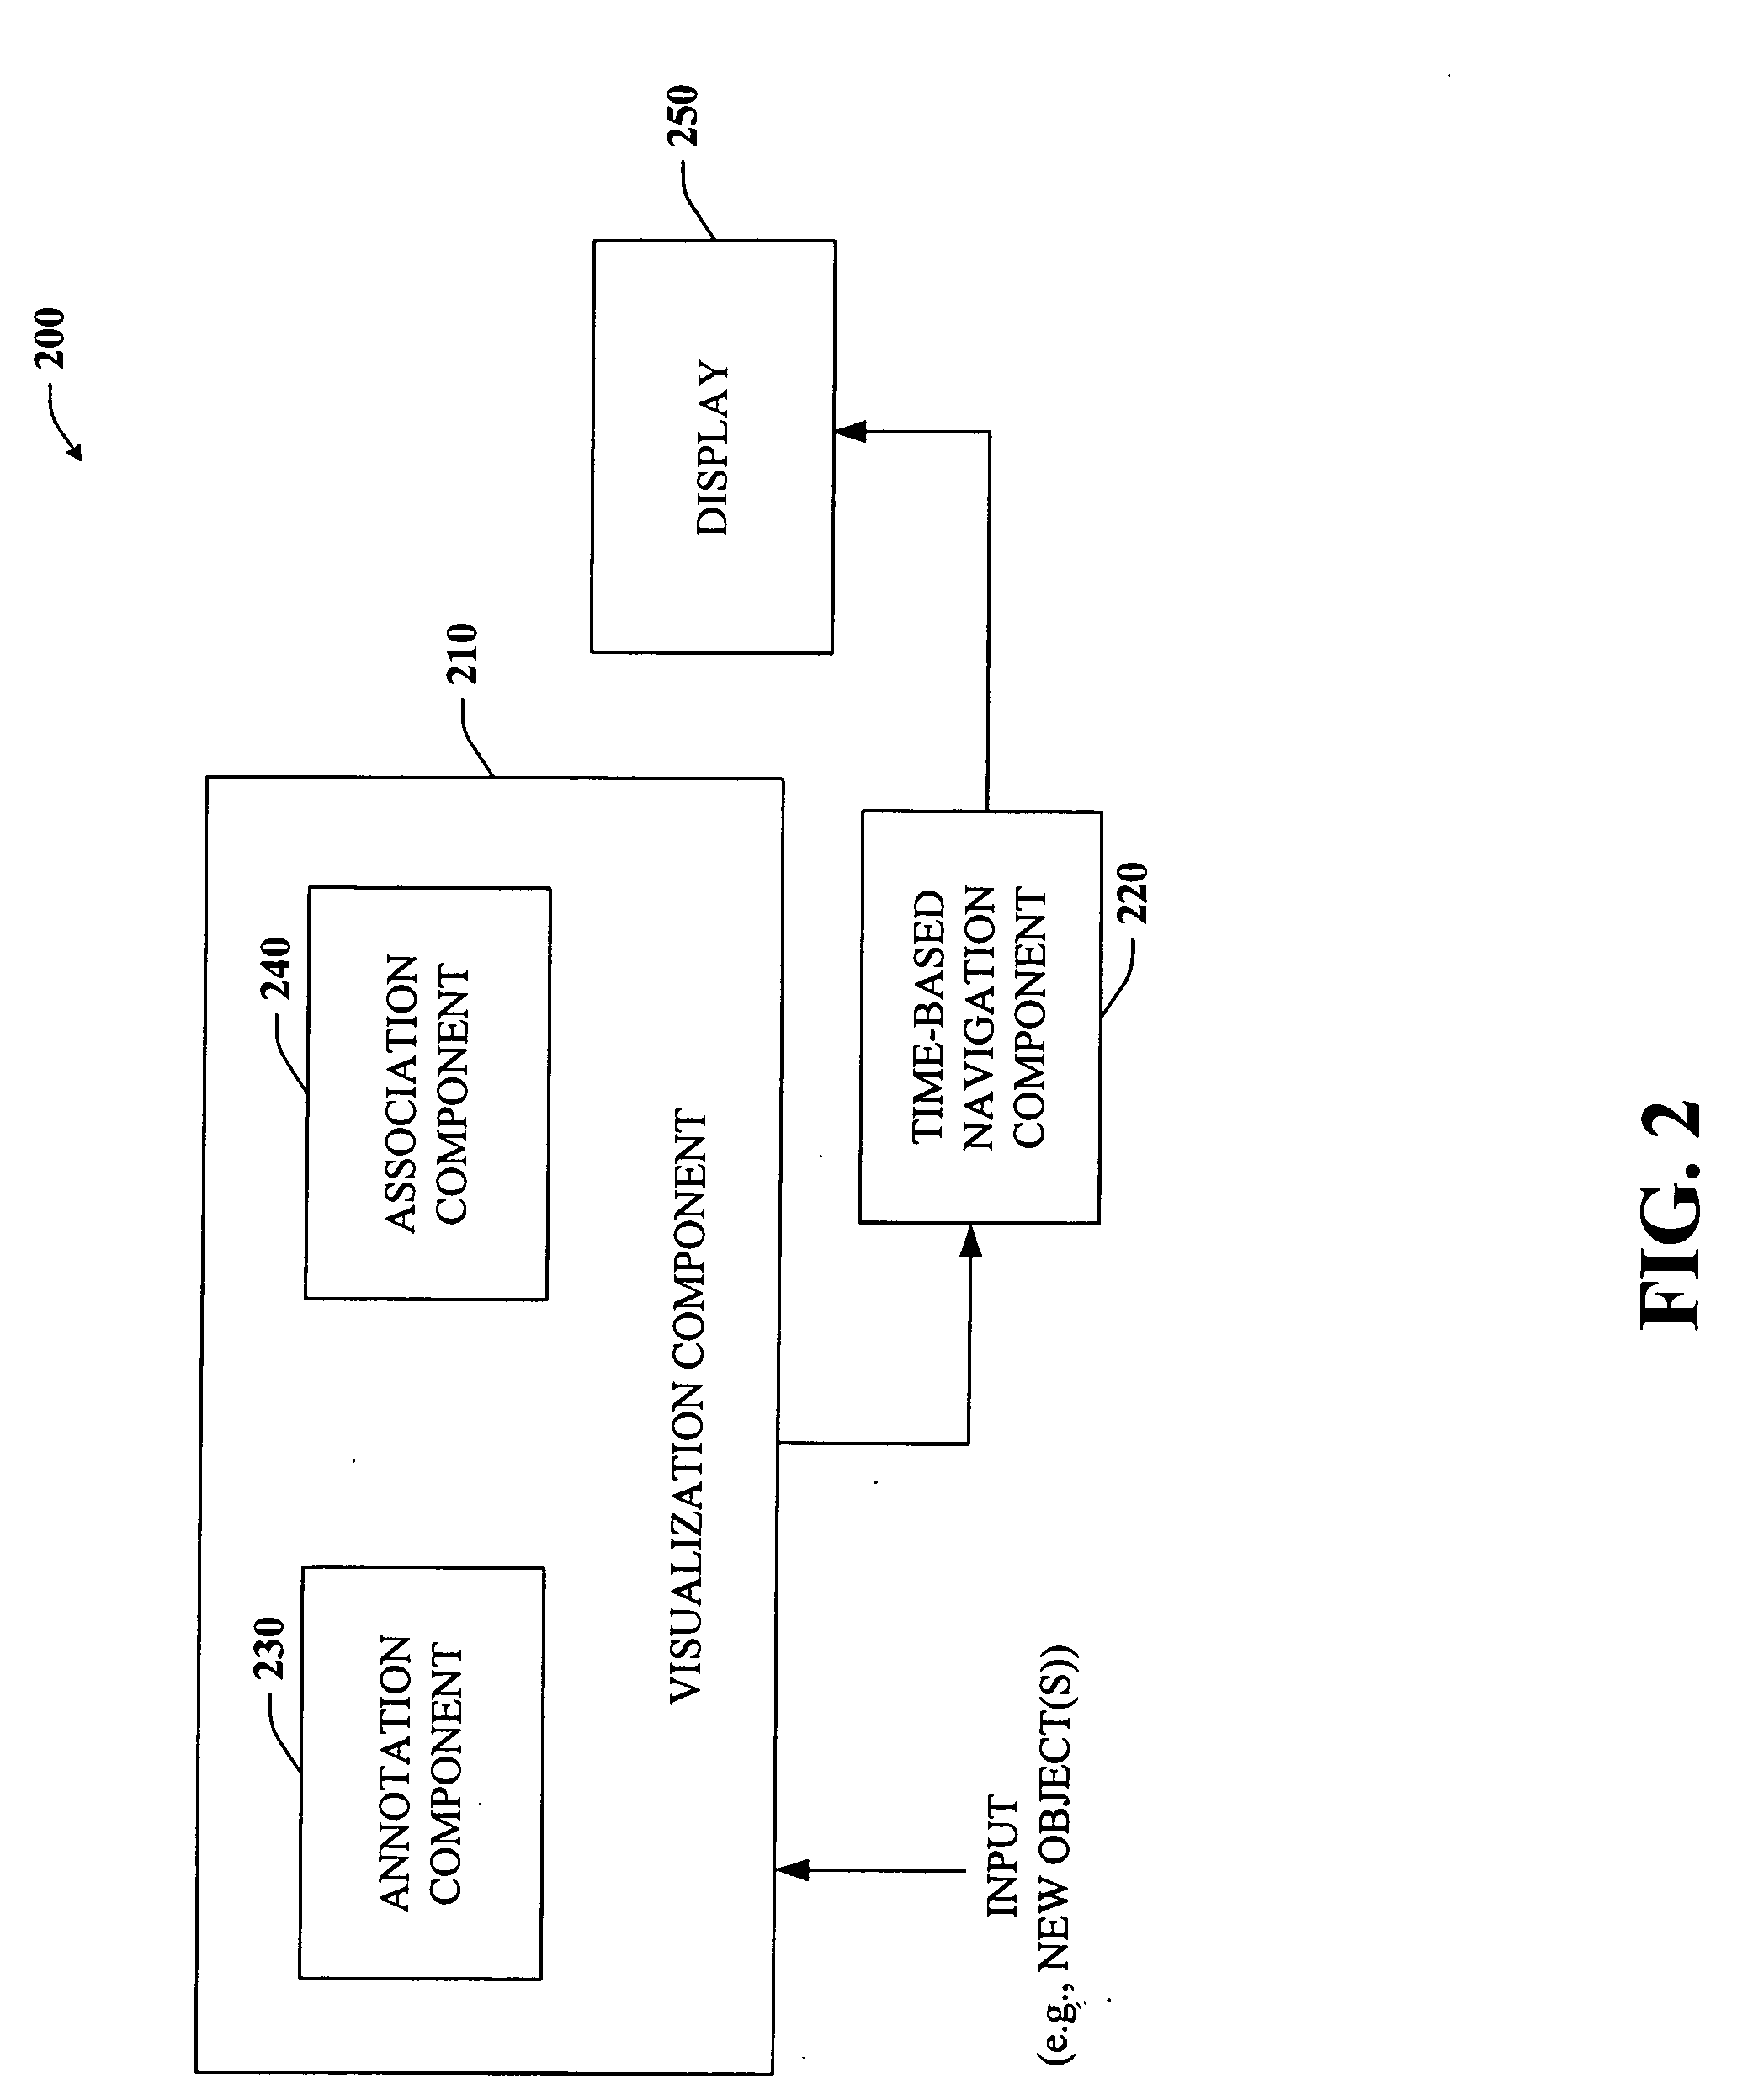 Systems and methods for managing a life journal